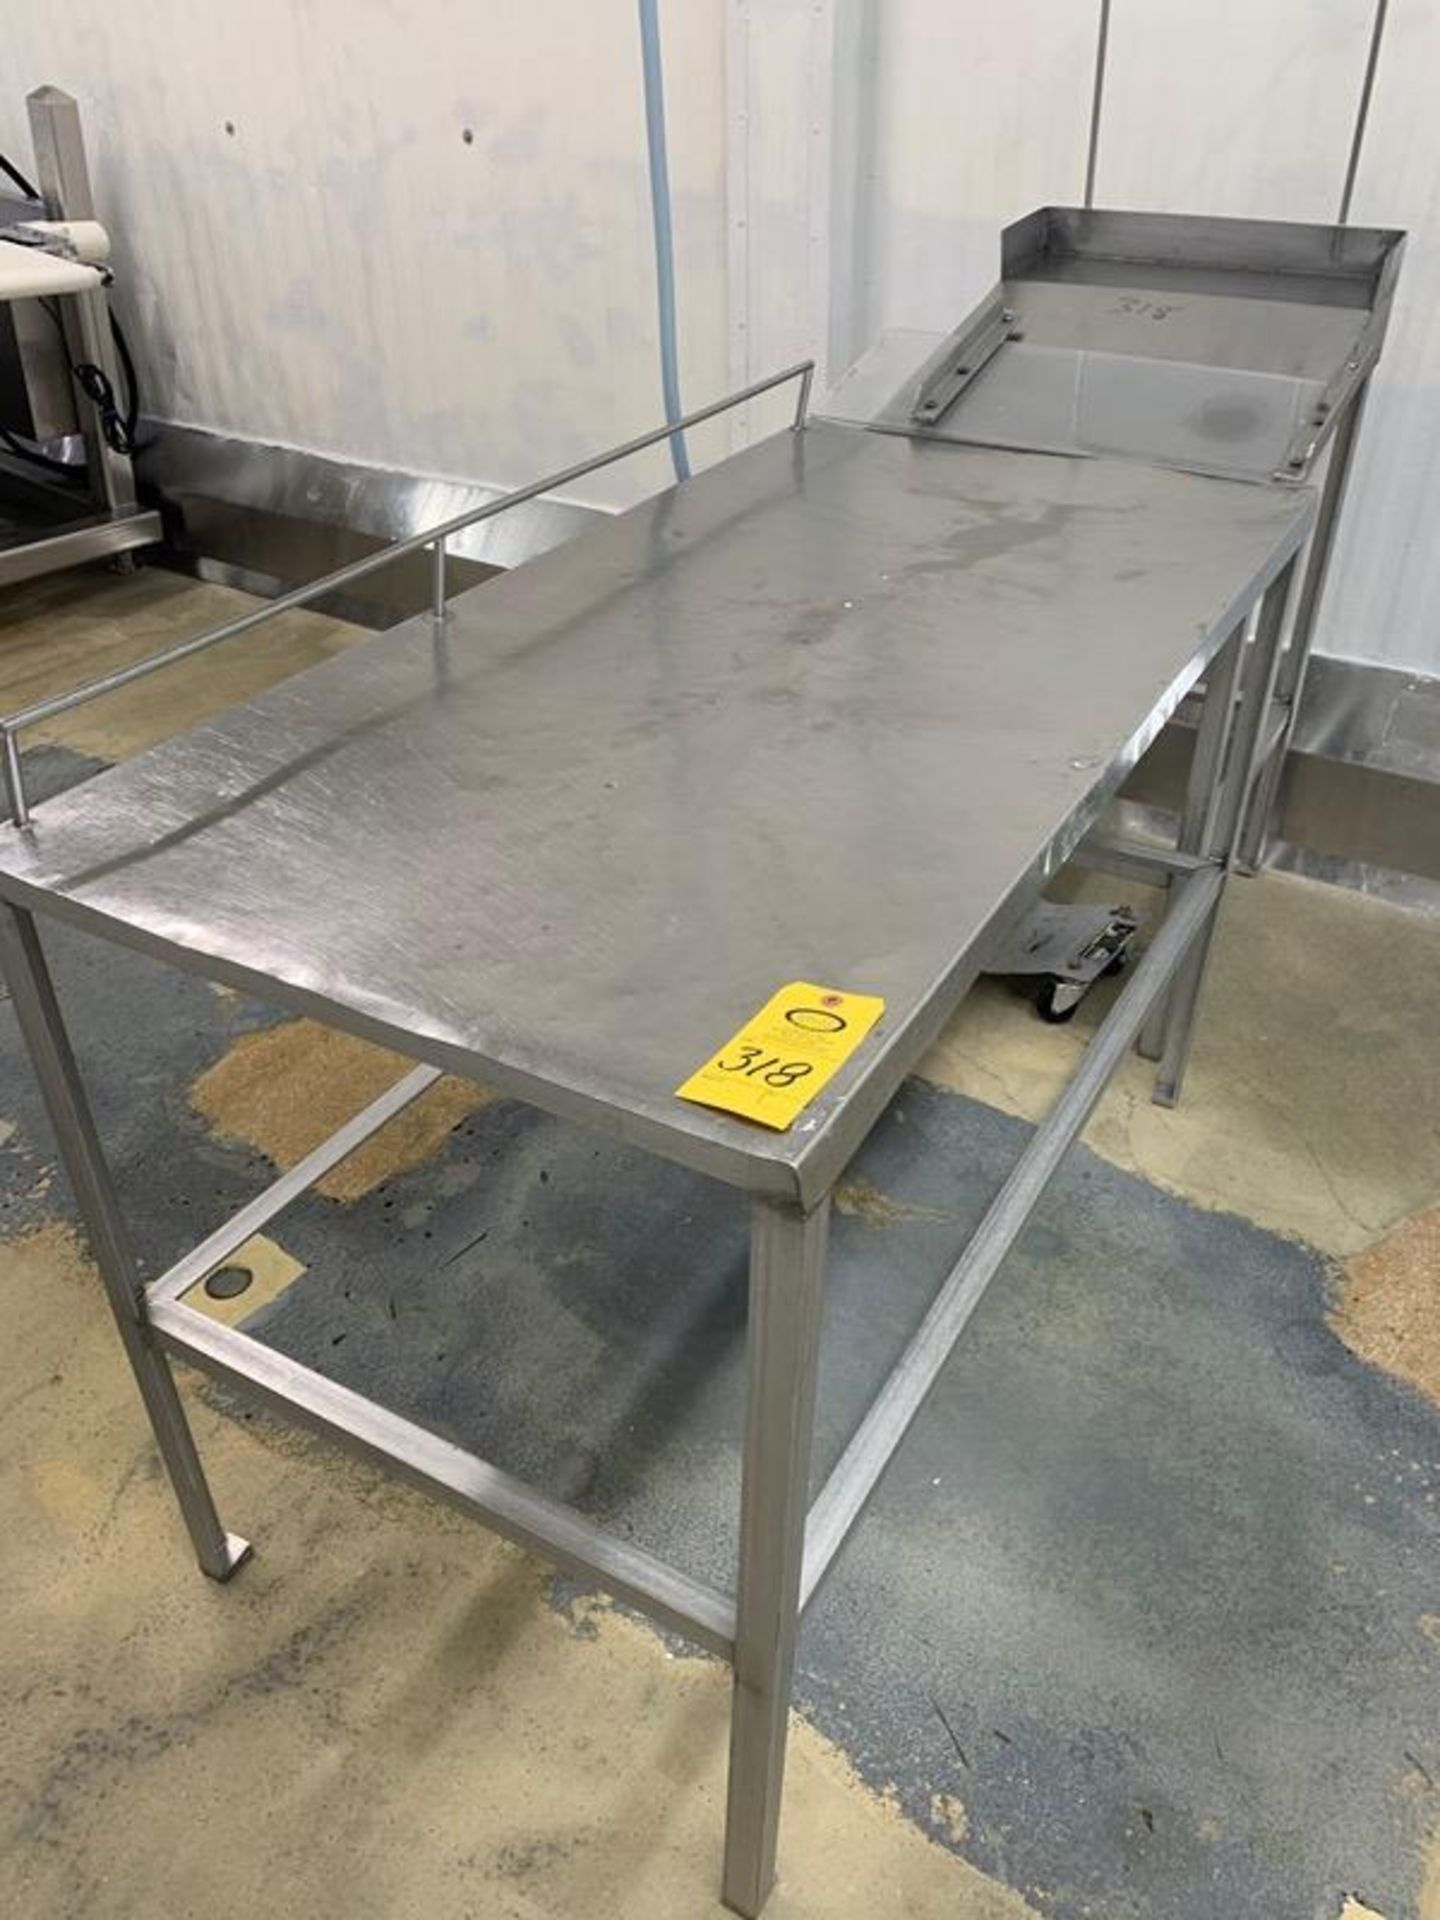 Lot Table (1) 30" W X 5' L X 36" H, (1) Foreman's Desk, (3) Stainless Steel Racks (Located in Mt.